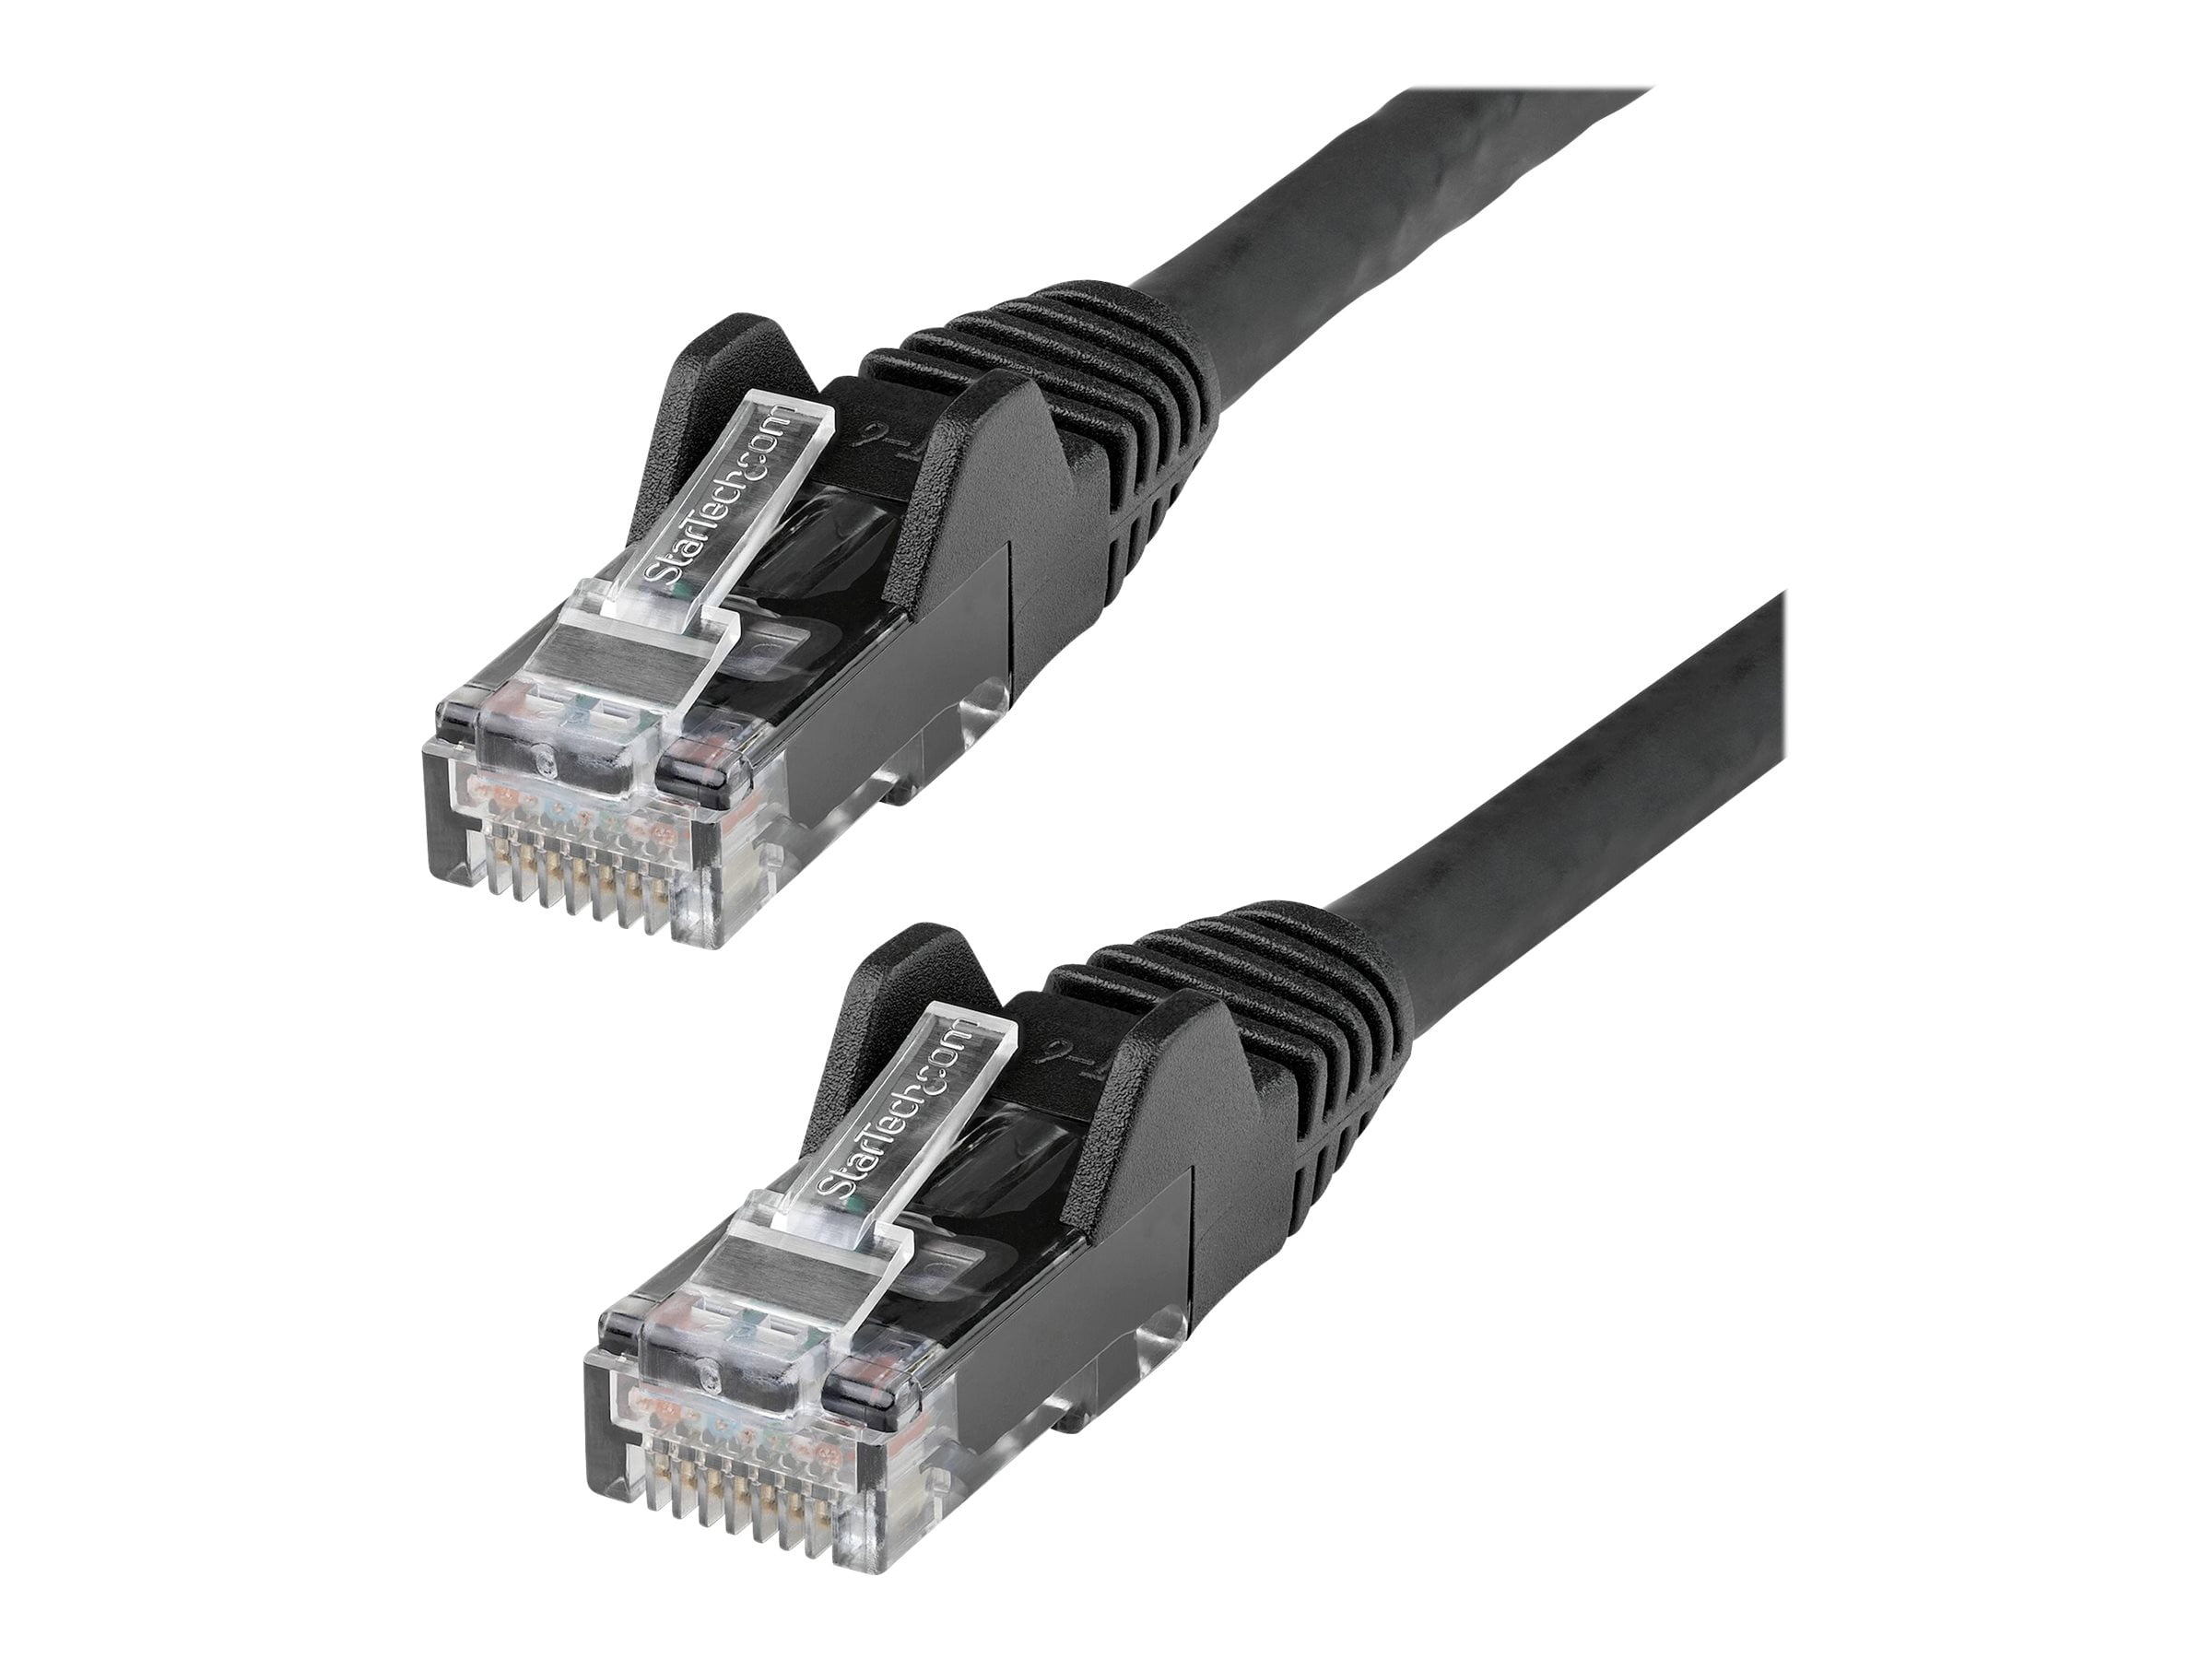 2 x 10 Feet RJ45 Hi-Speed UTP 24AWG Cat6 Networking Cable CAT Ethernet LAN Cords 